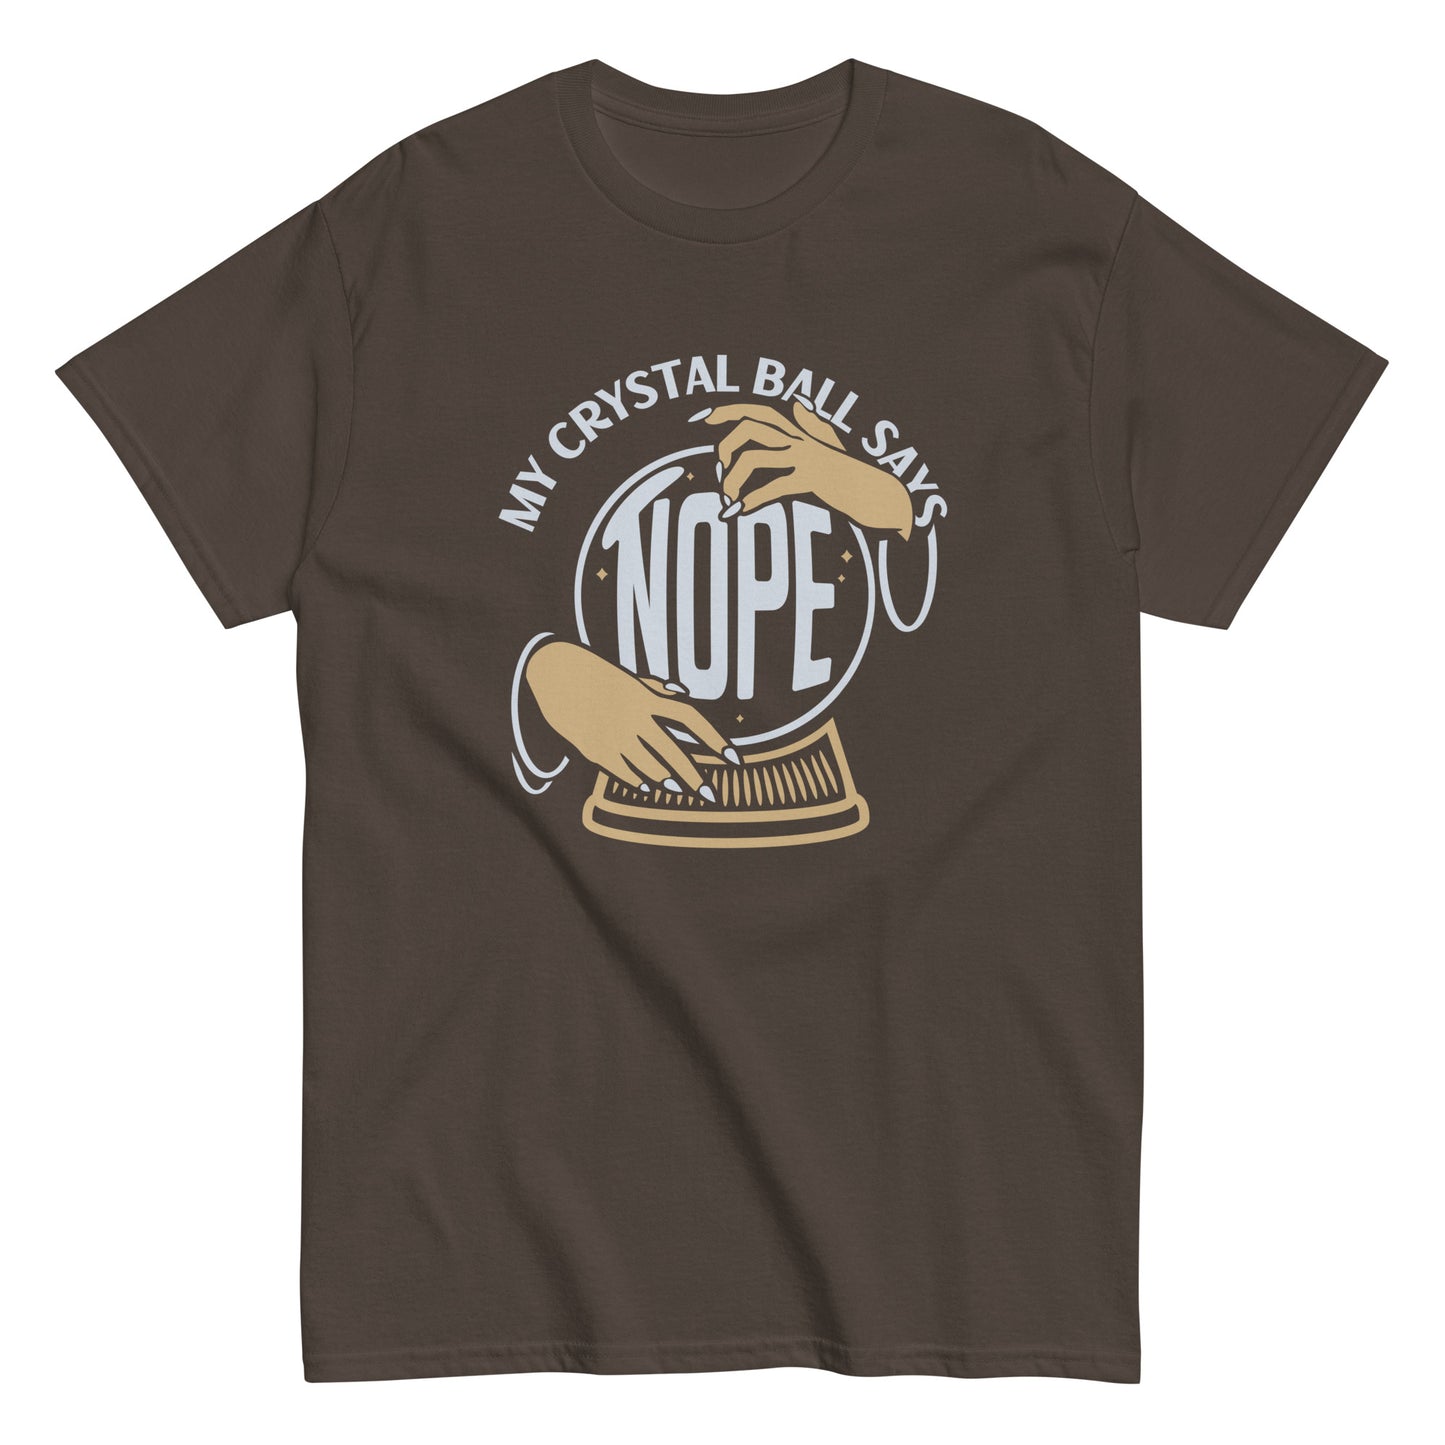 My Crystal Ball Says Nope Men's Classic Tee